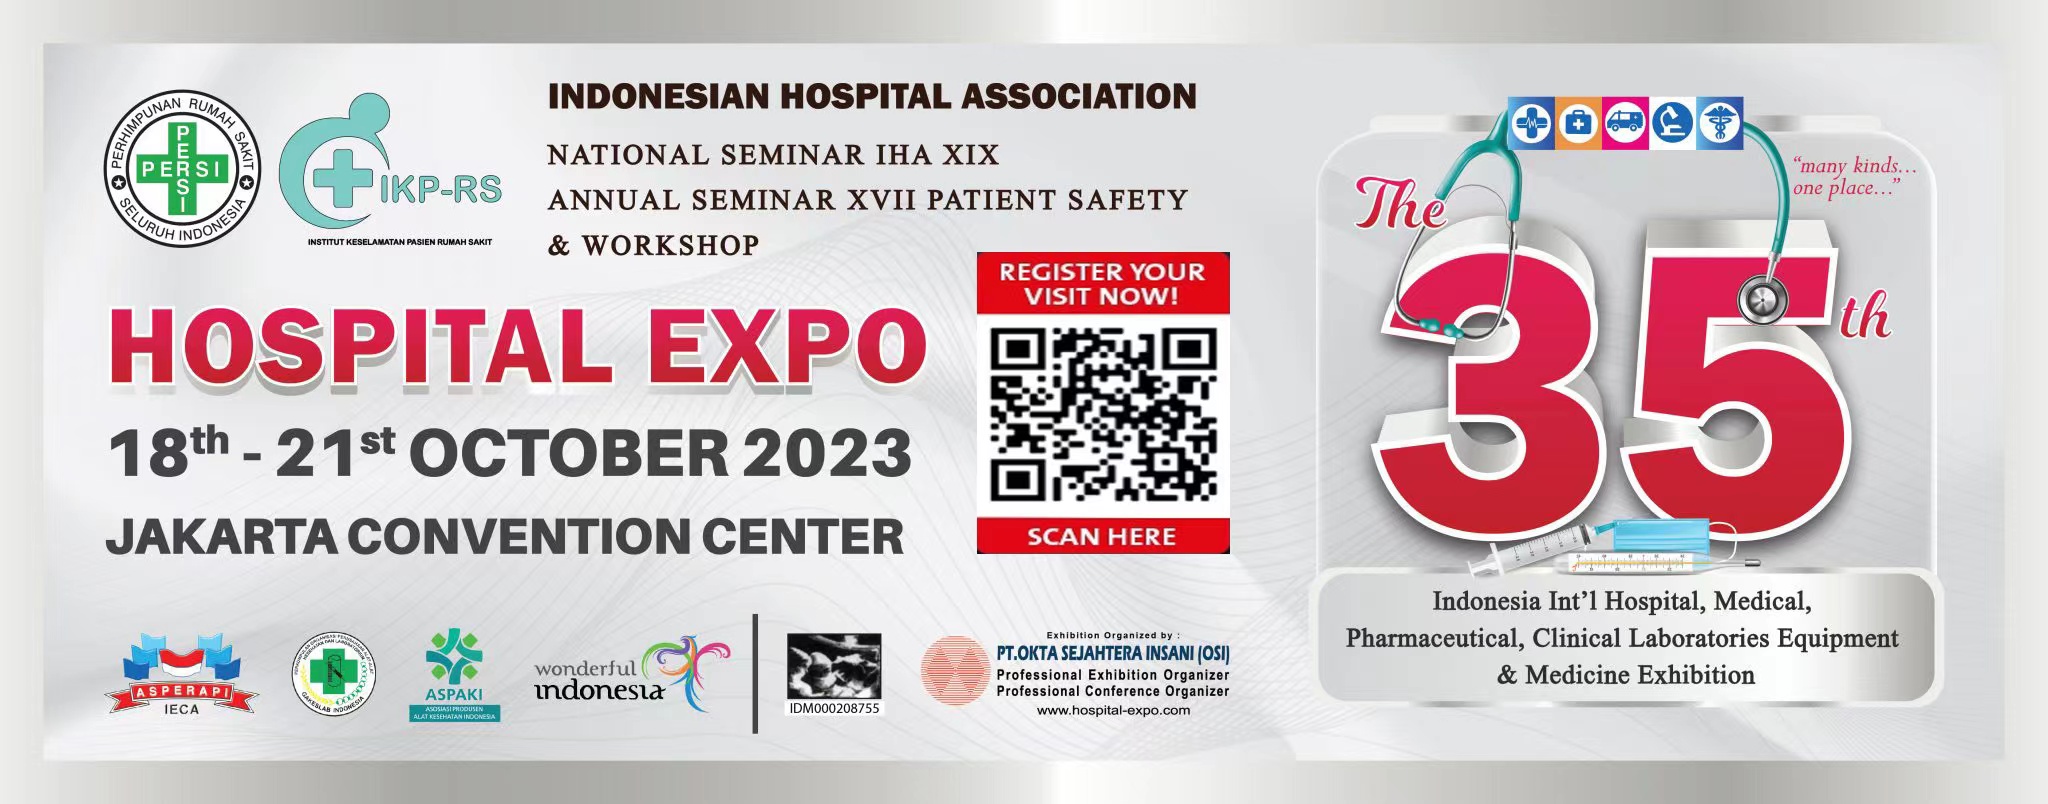 INDONESIAN HOSPITAL EXPO 2023 will be held from 18th - 21th October in Jakarta  Convention Center